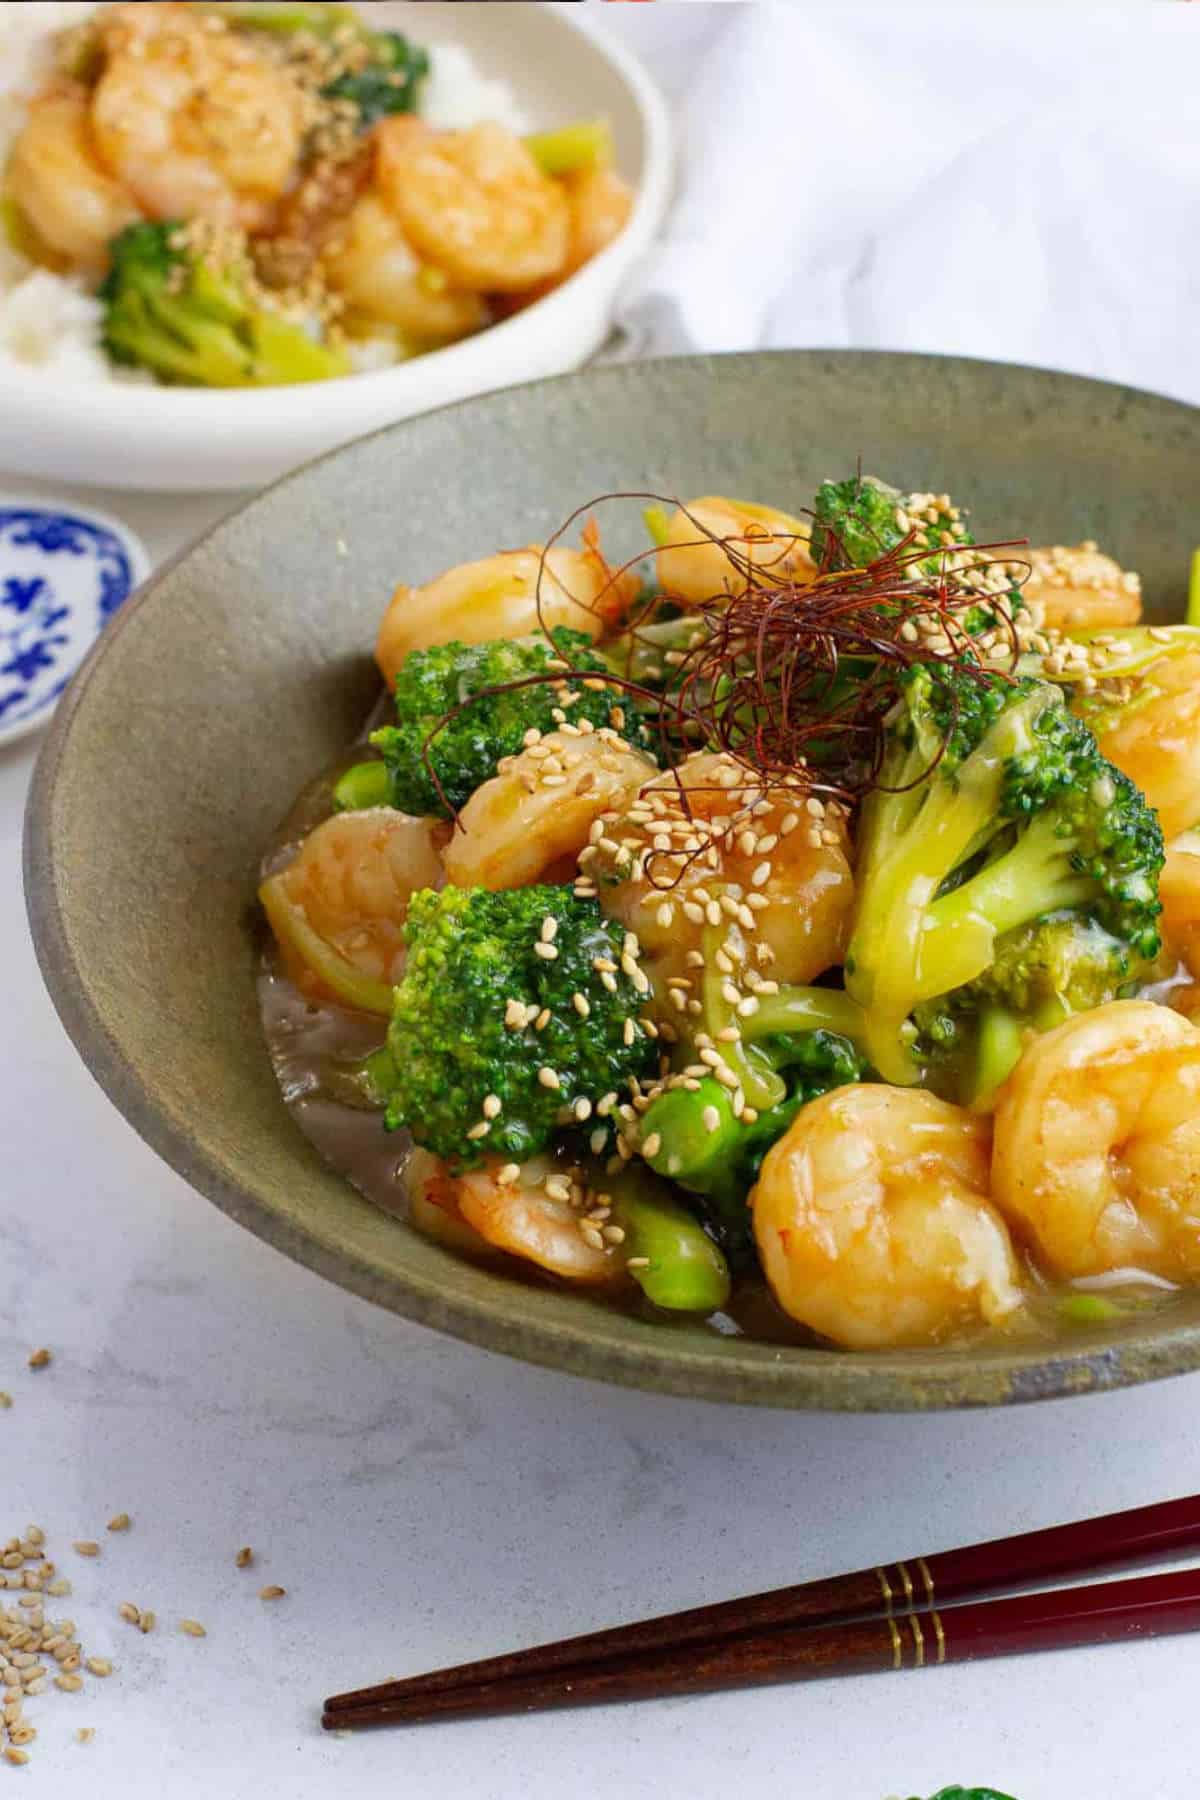 Shrimp and broccoli in a bowl.